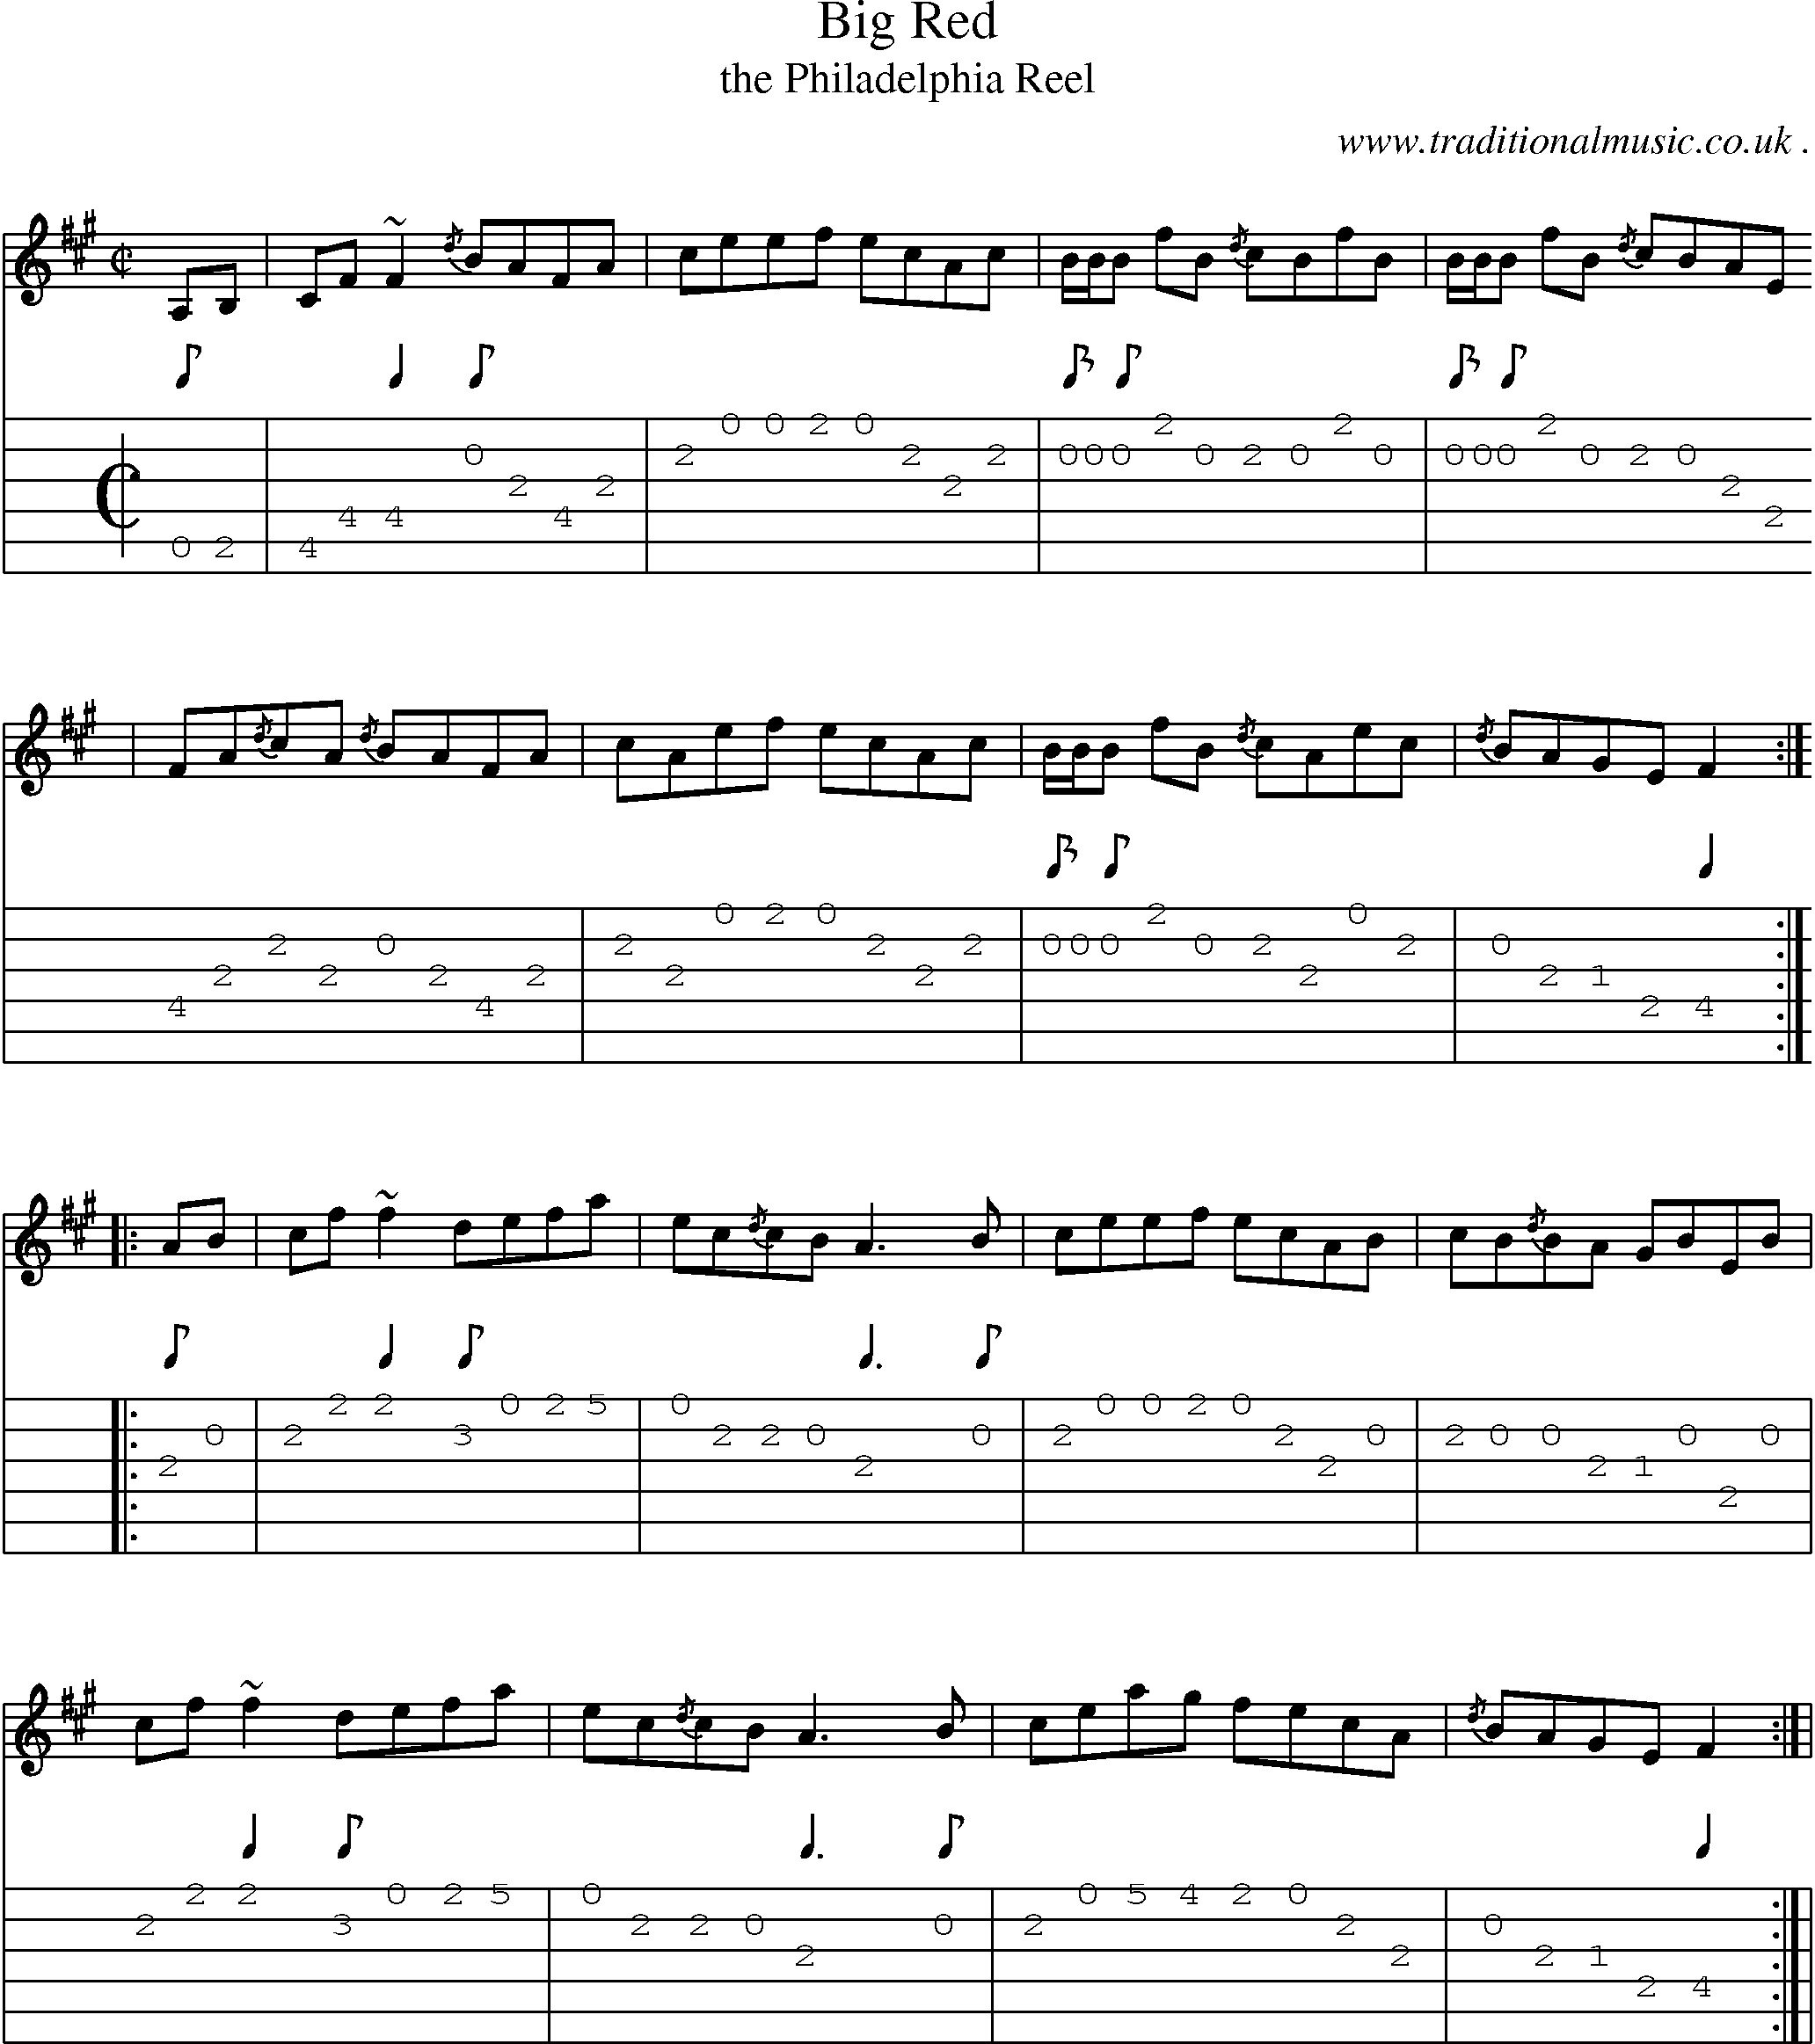 Sheet-music  score, Chords and Guitar Tabs for Big Red